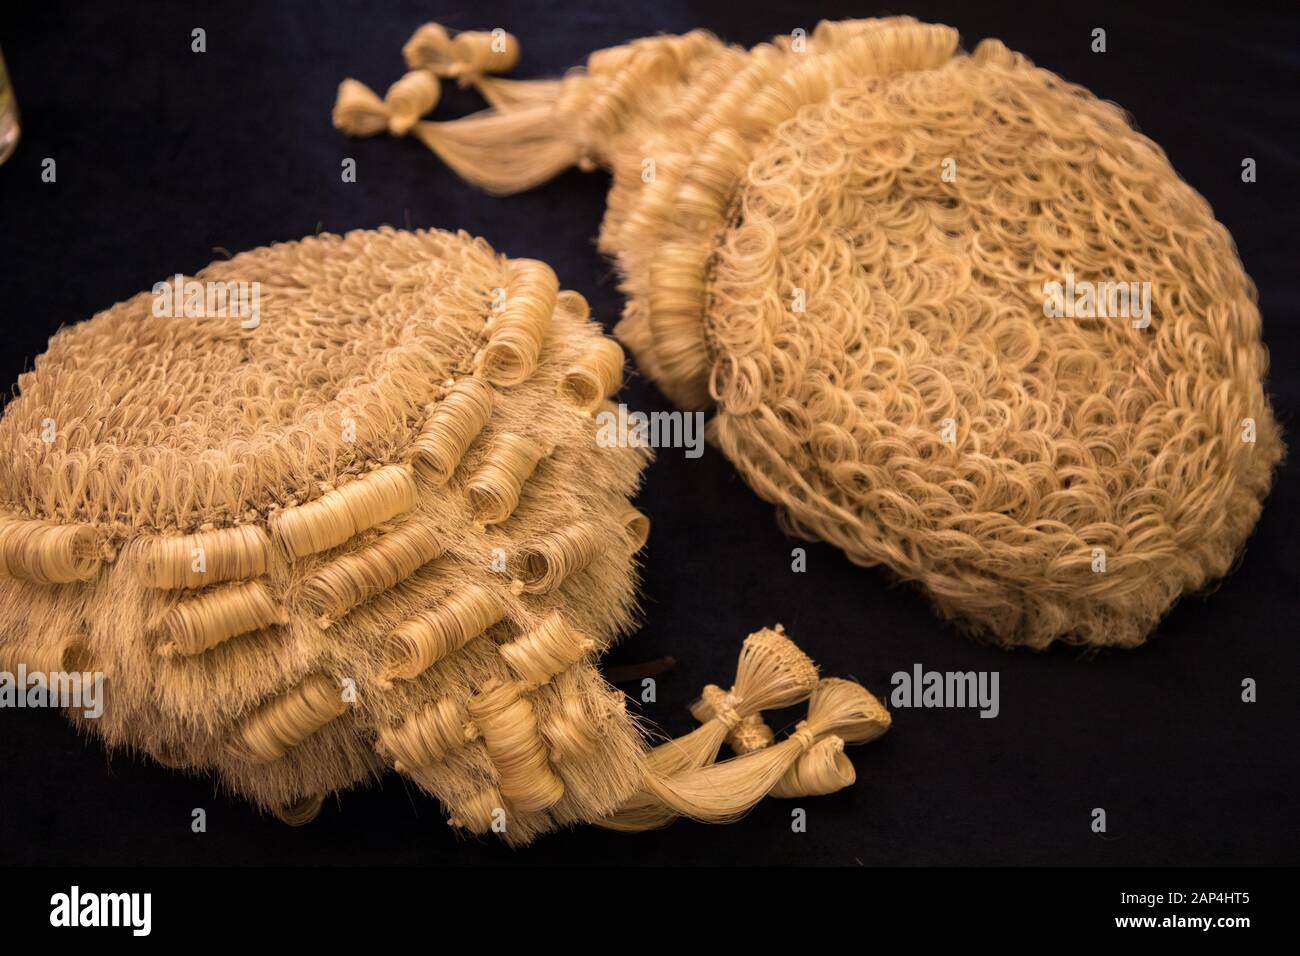 Two wigs as worn by some judges and barristers in England and Wales, also known as a peruke. This picture was taken at a graduation ceremony photoshoo Stock Photo